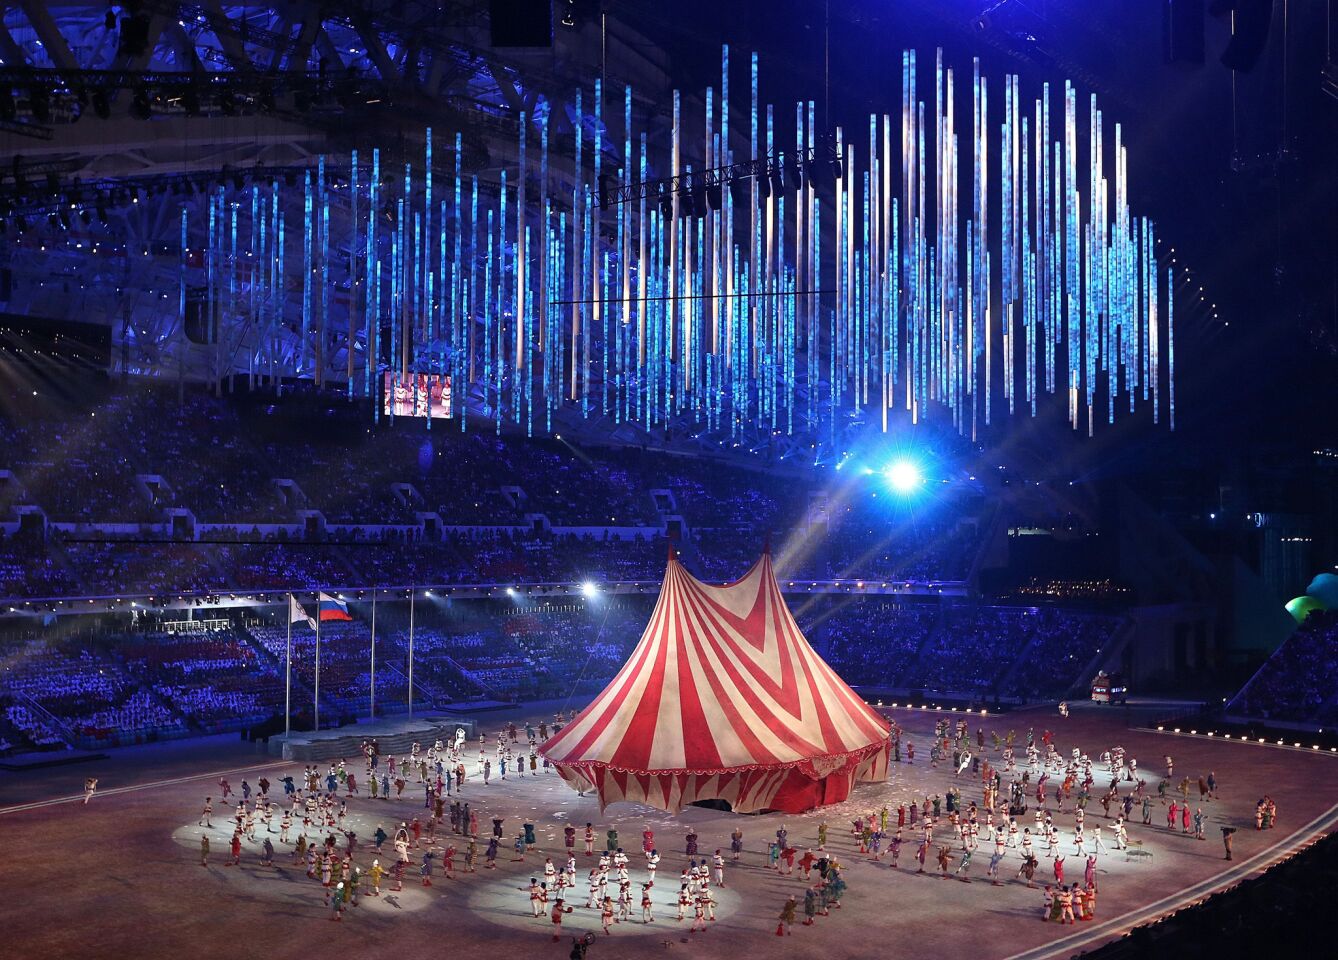 Circus performers take center stage at Fisht Stadium during the 2014 Sochi Winter Olympics Closing Ceremony.